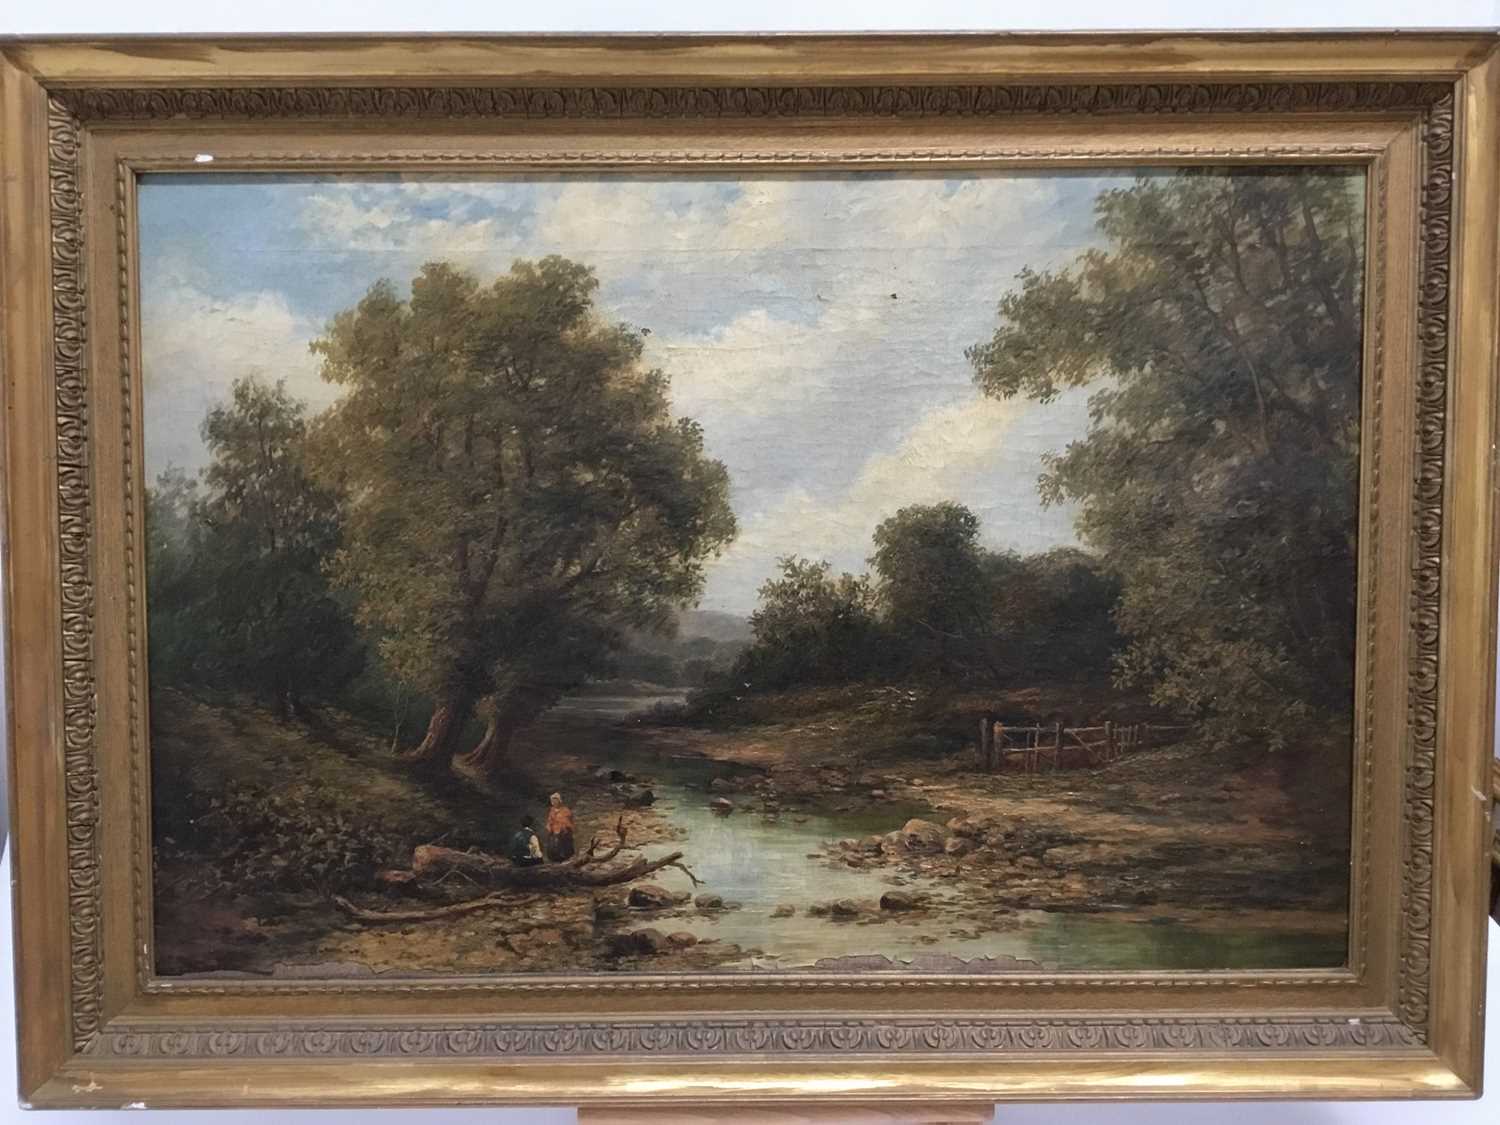 19th century English School oil on canvas - figures by a river bank, in gilt frame